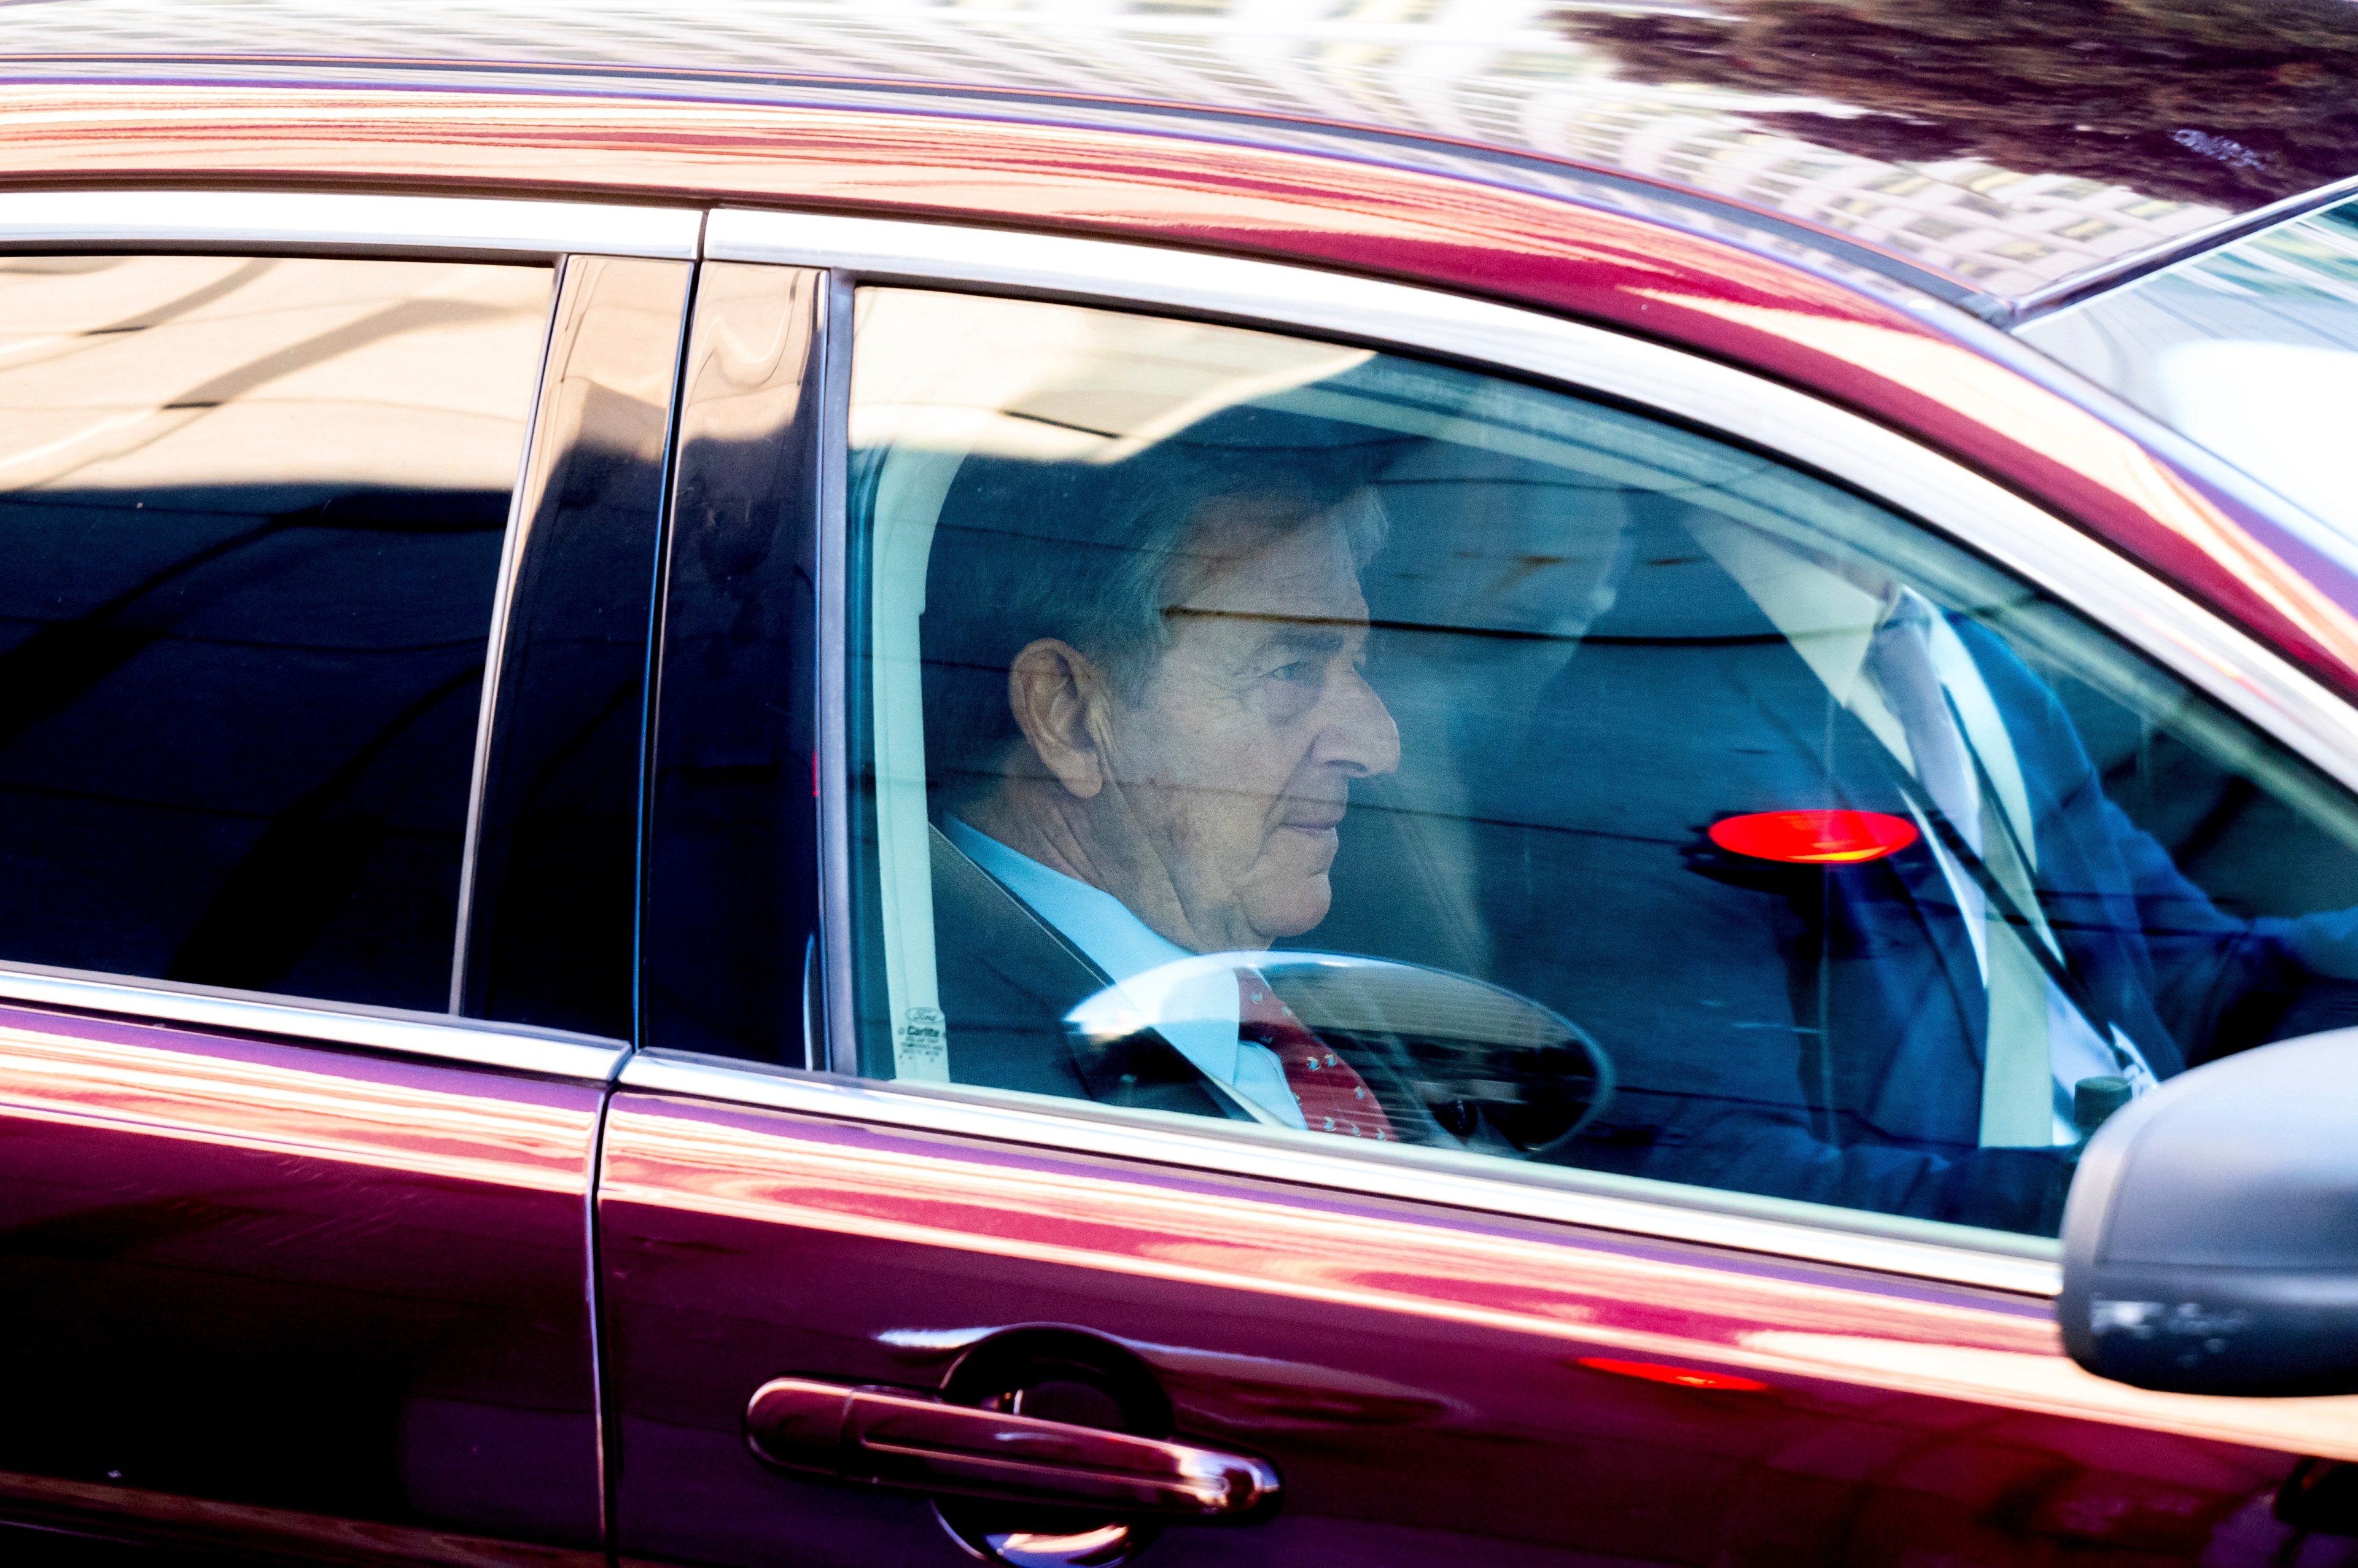 Paul Pelosi in the passenger seat of a vehicle.